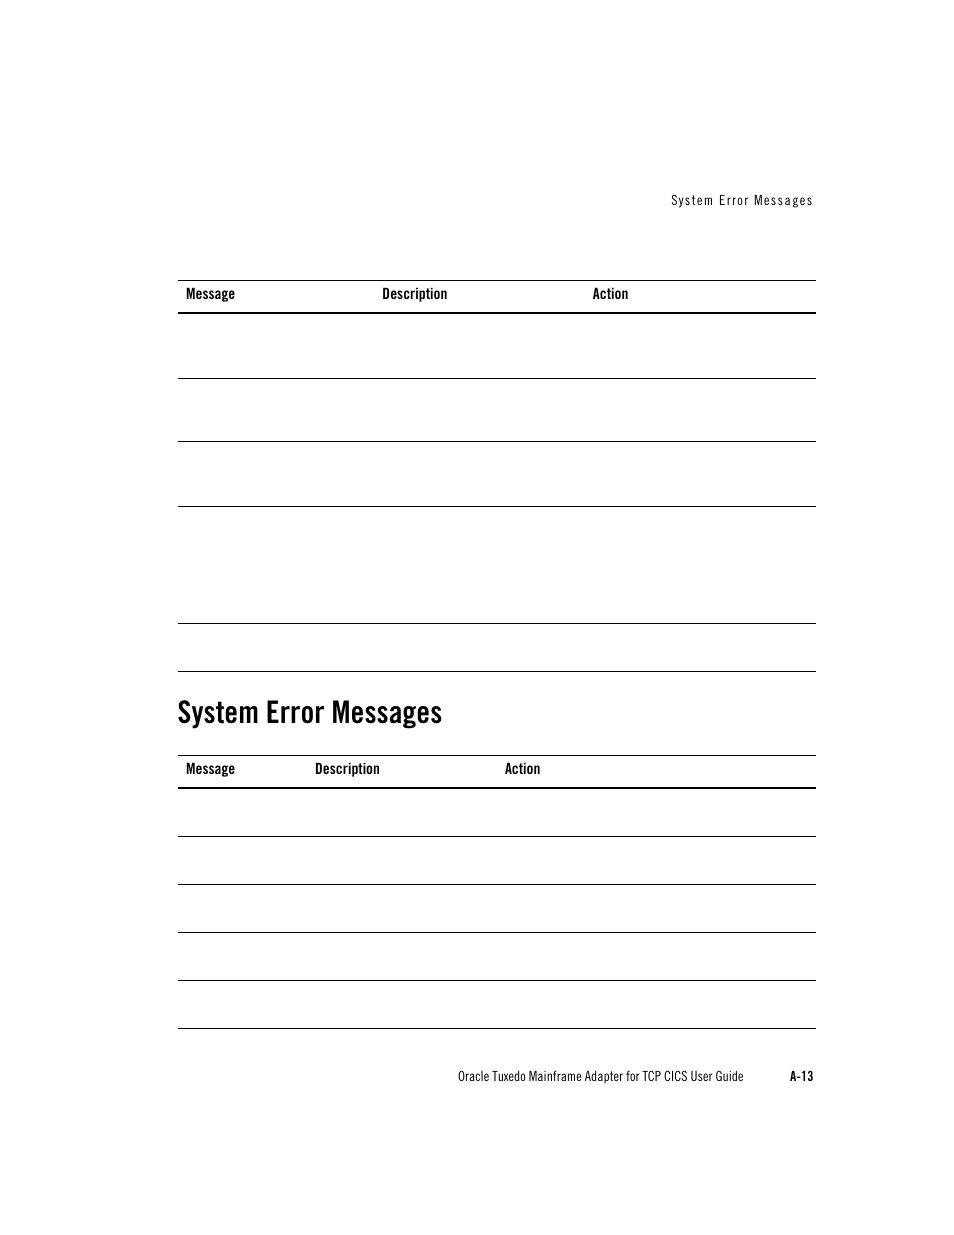 System error messages | Oracle Audio Technologies Oracle Tuxedo User Manual | Page 111 / 112